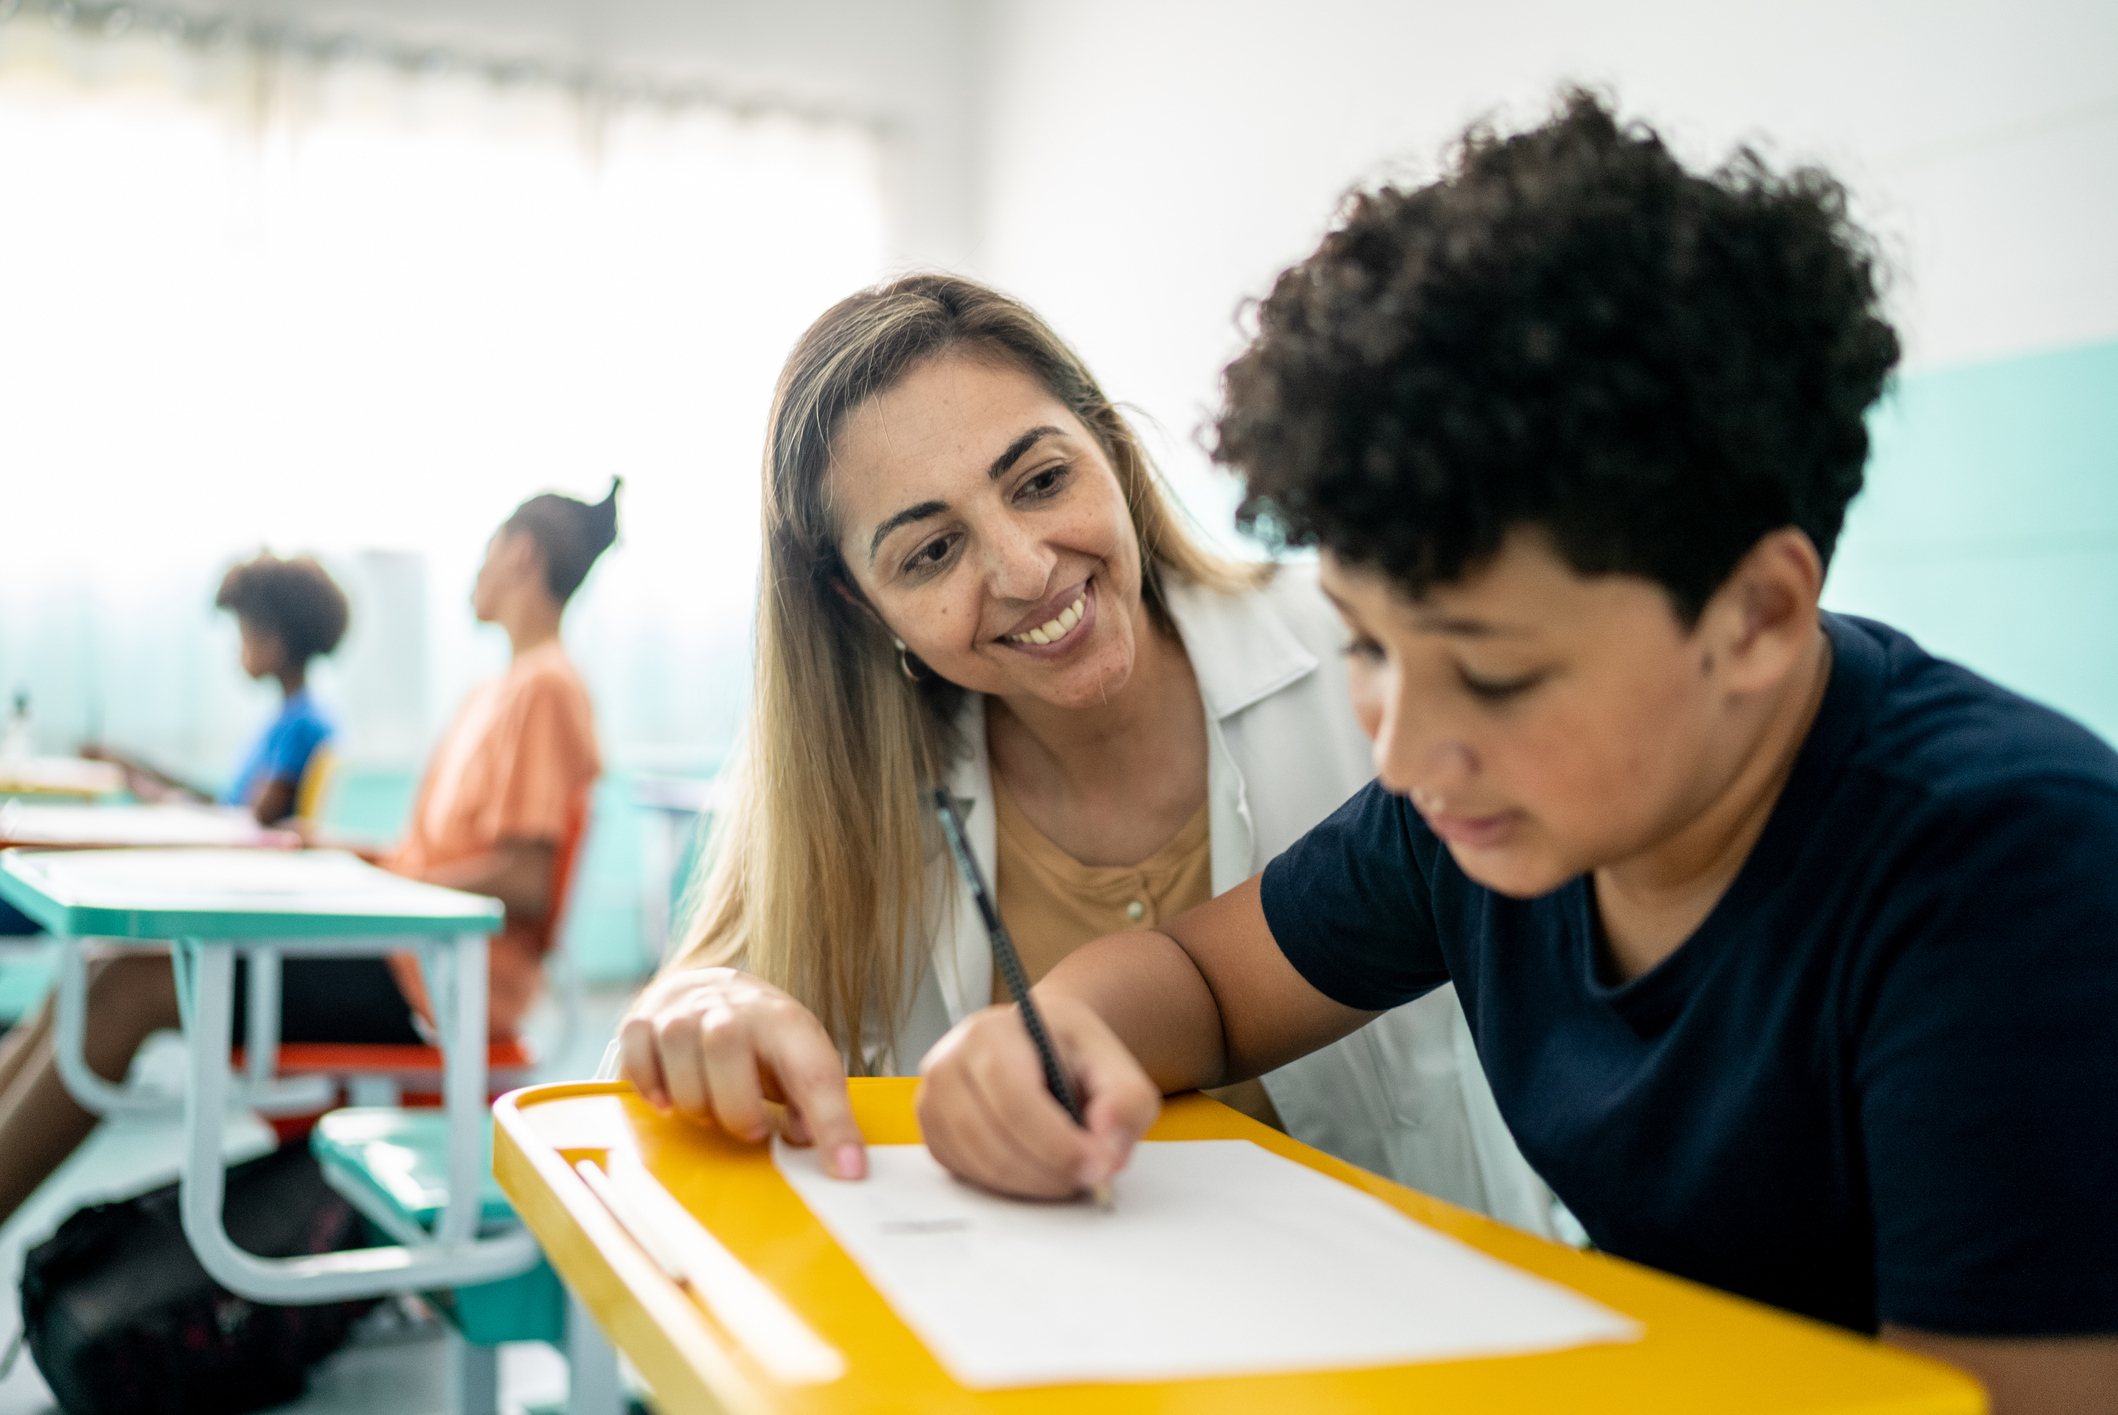 Teacher assisting a student with schoolwork in a classroom